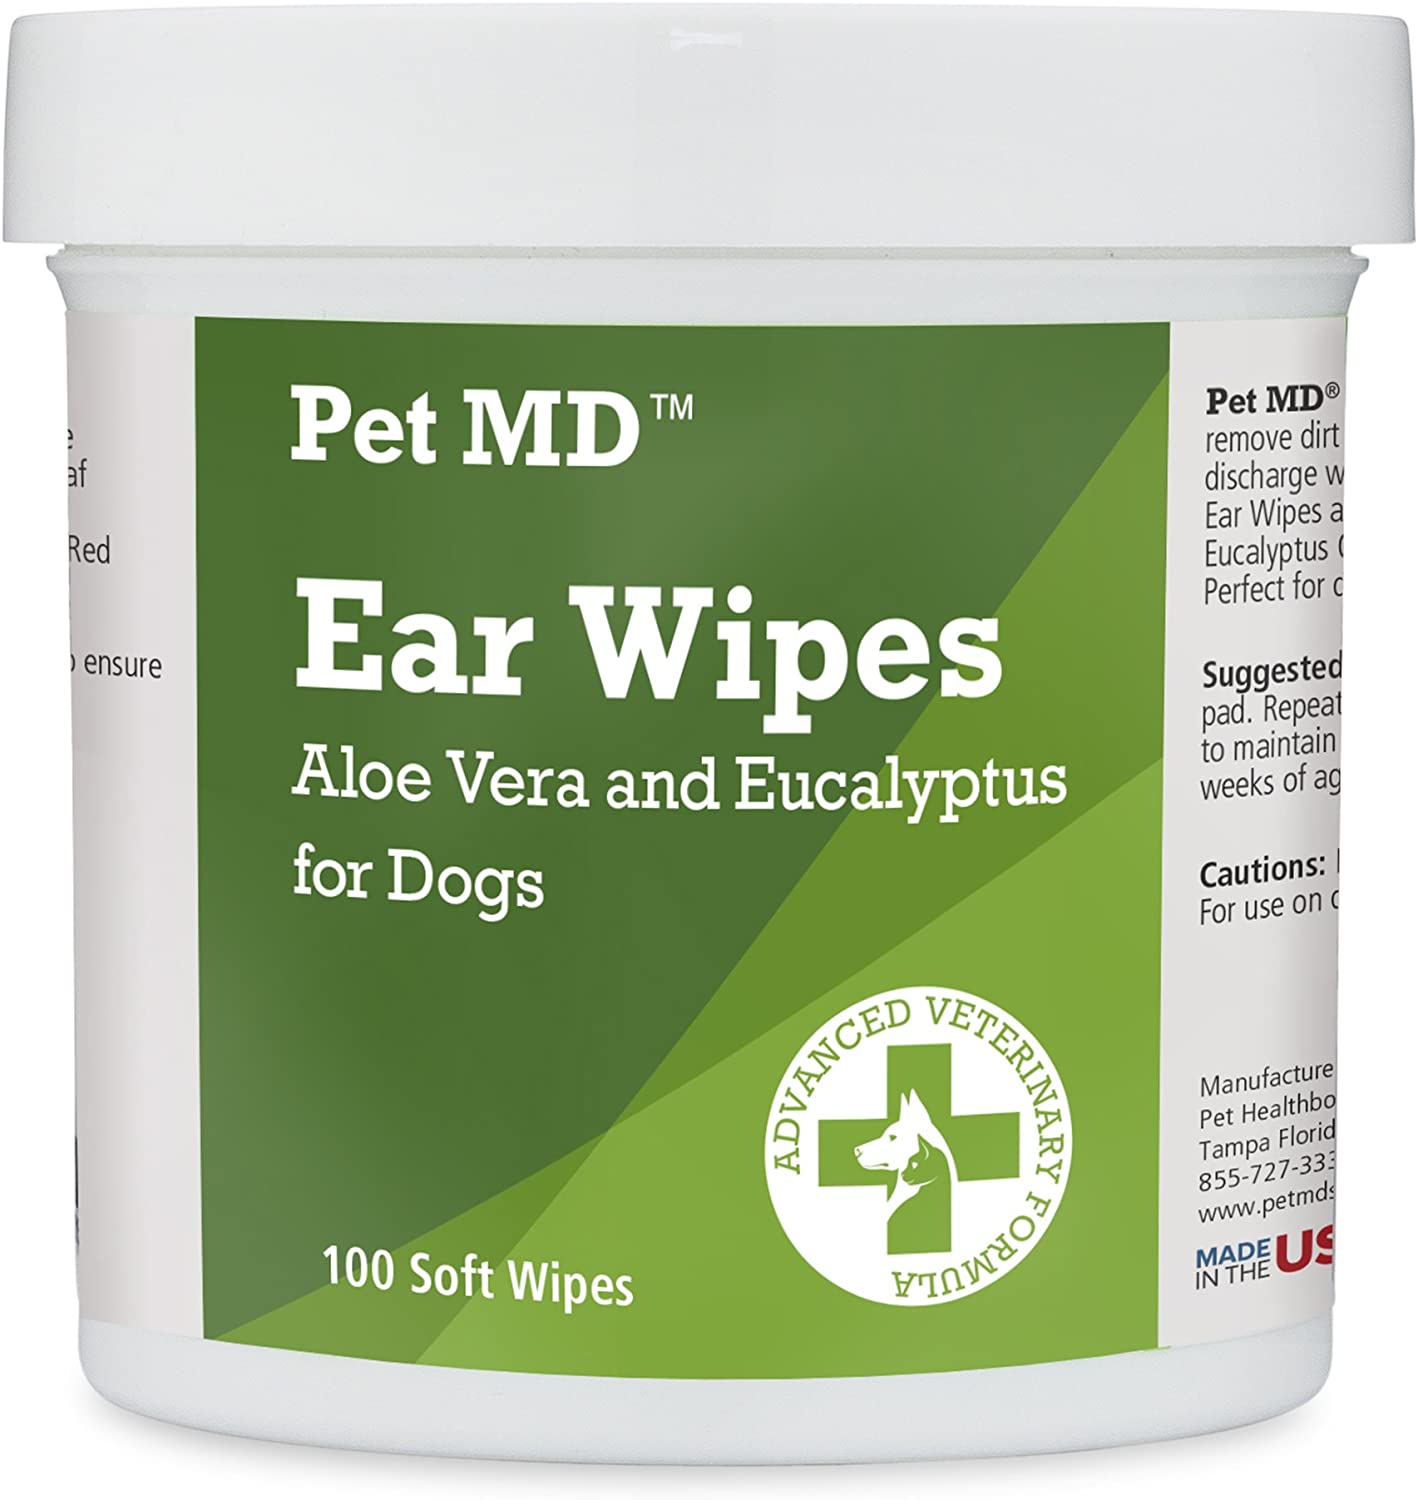 Pet MD – Dog Ear Cleaner Wipes – Otic Cleanser for Dogs to Stop Ear Itching, and Infections with Aloe and Eucalyptus – 100 Count